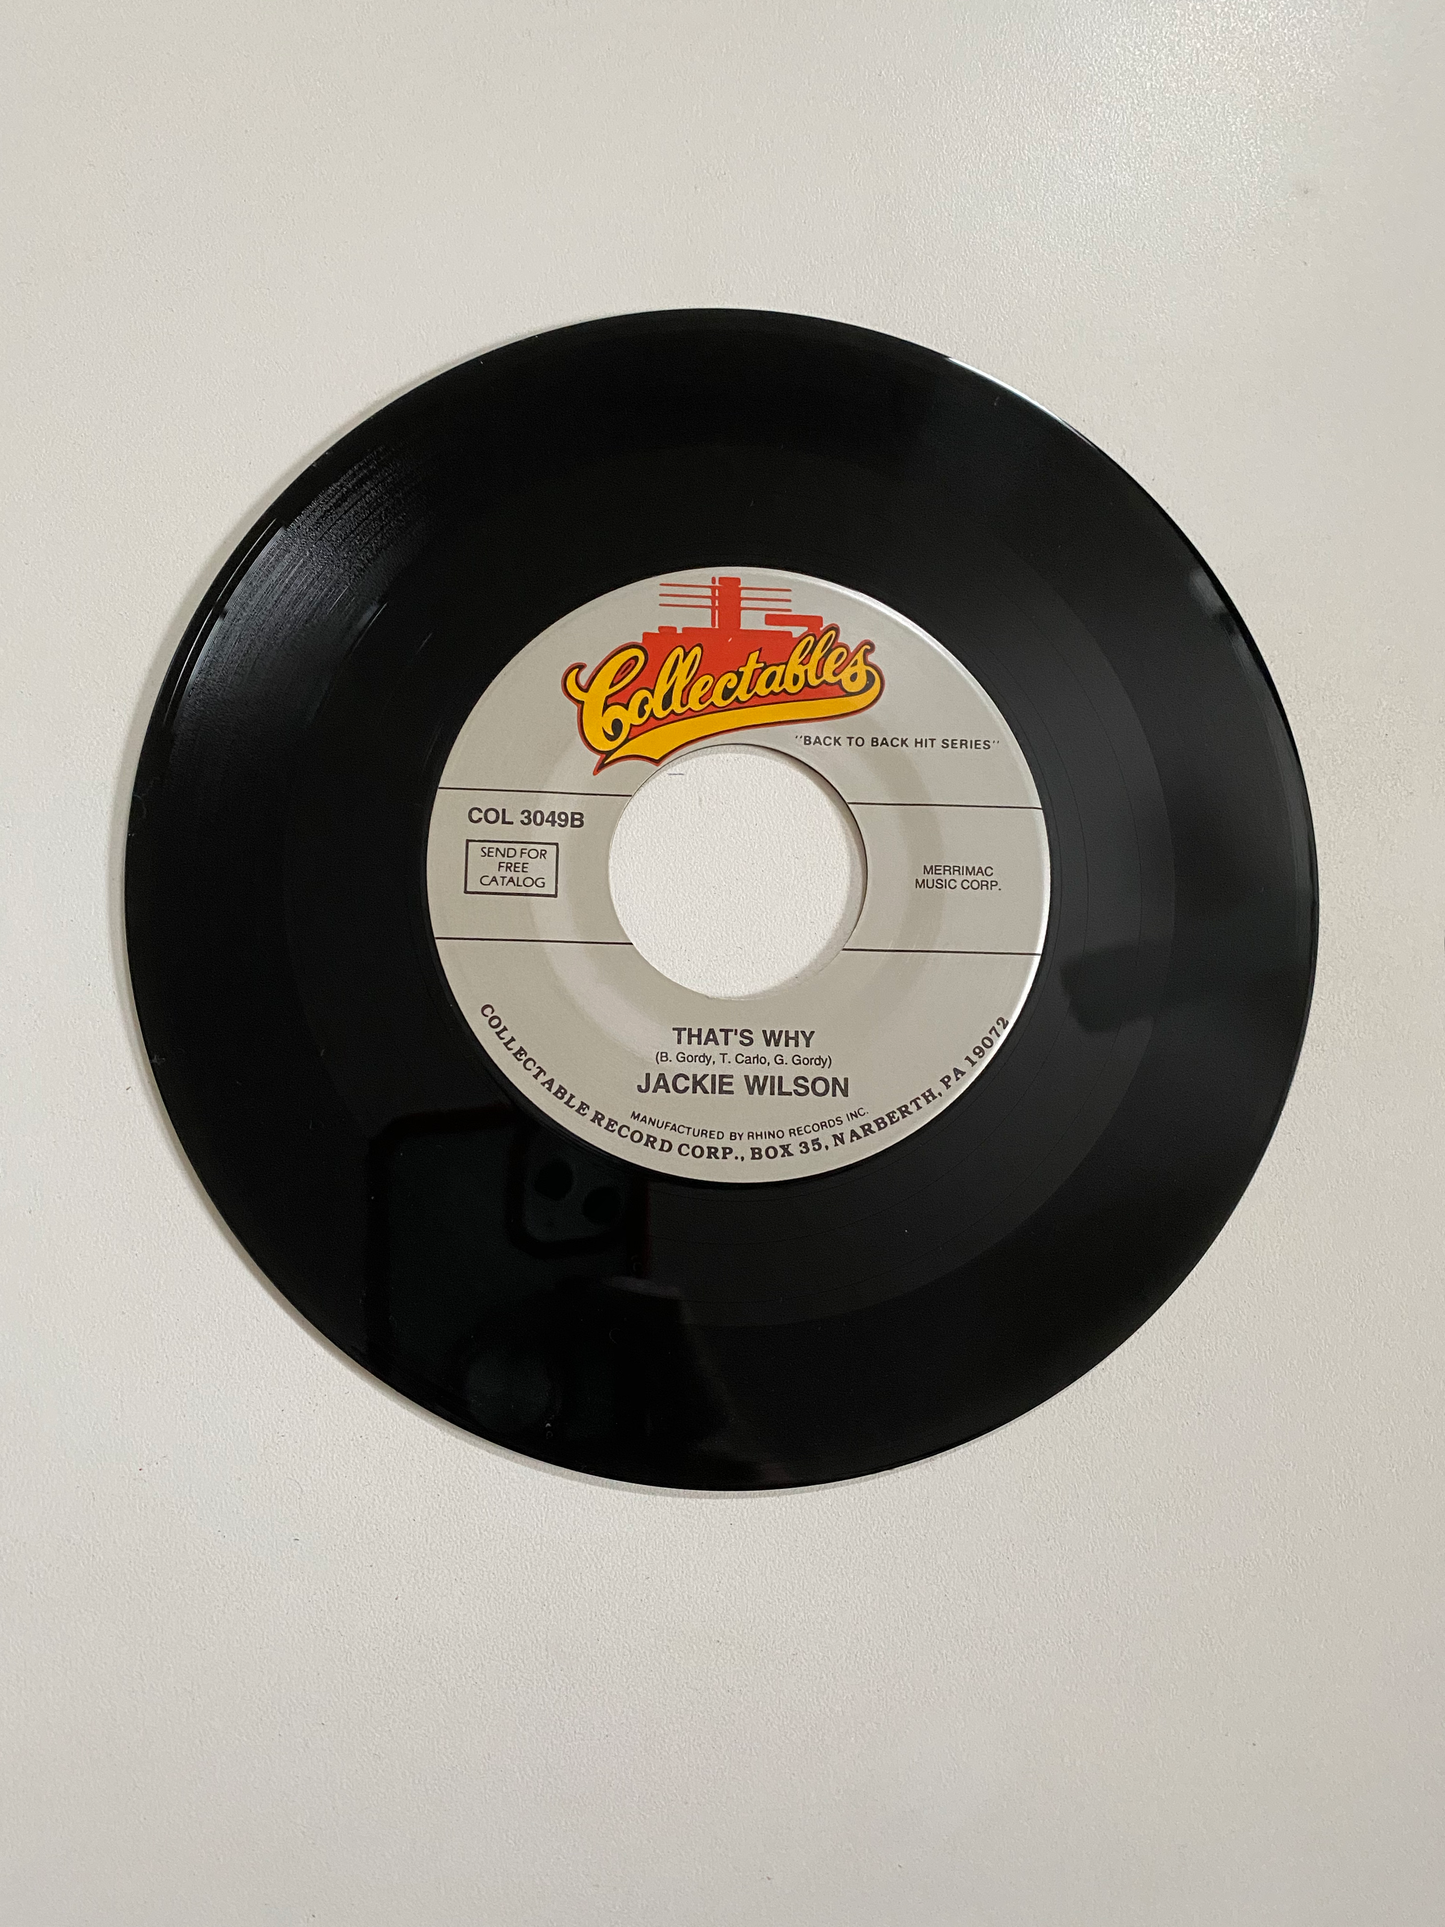 Jackie Wilson - To Be Loved | 45 The Vintedge Co.